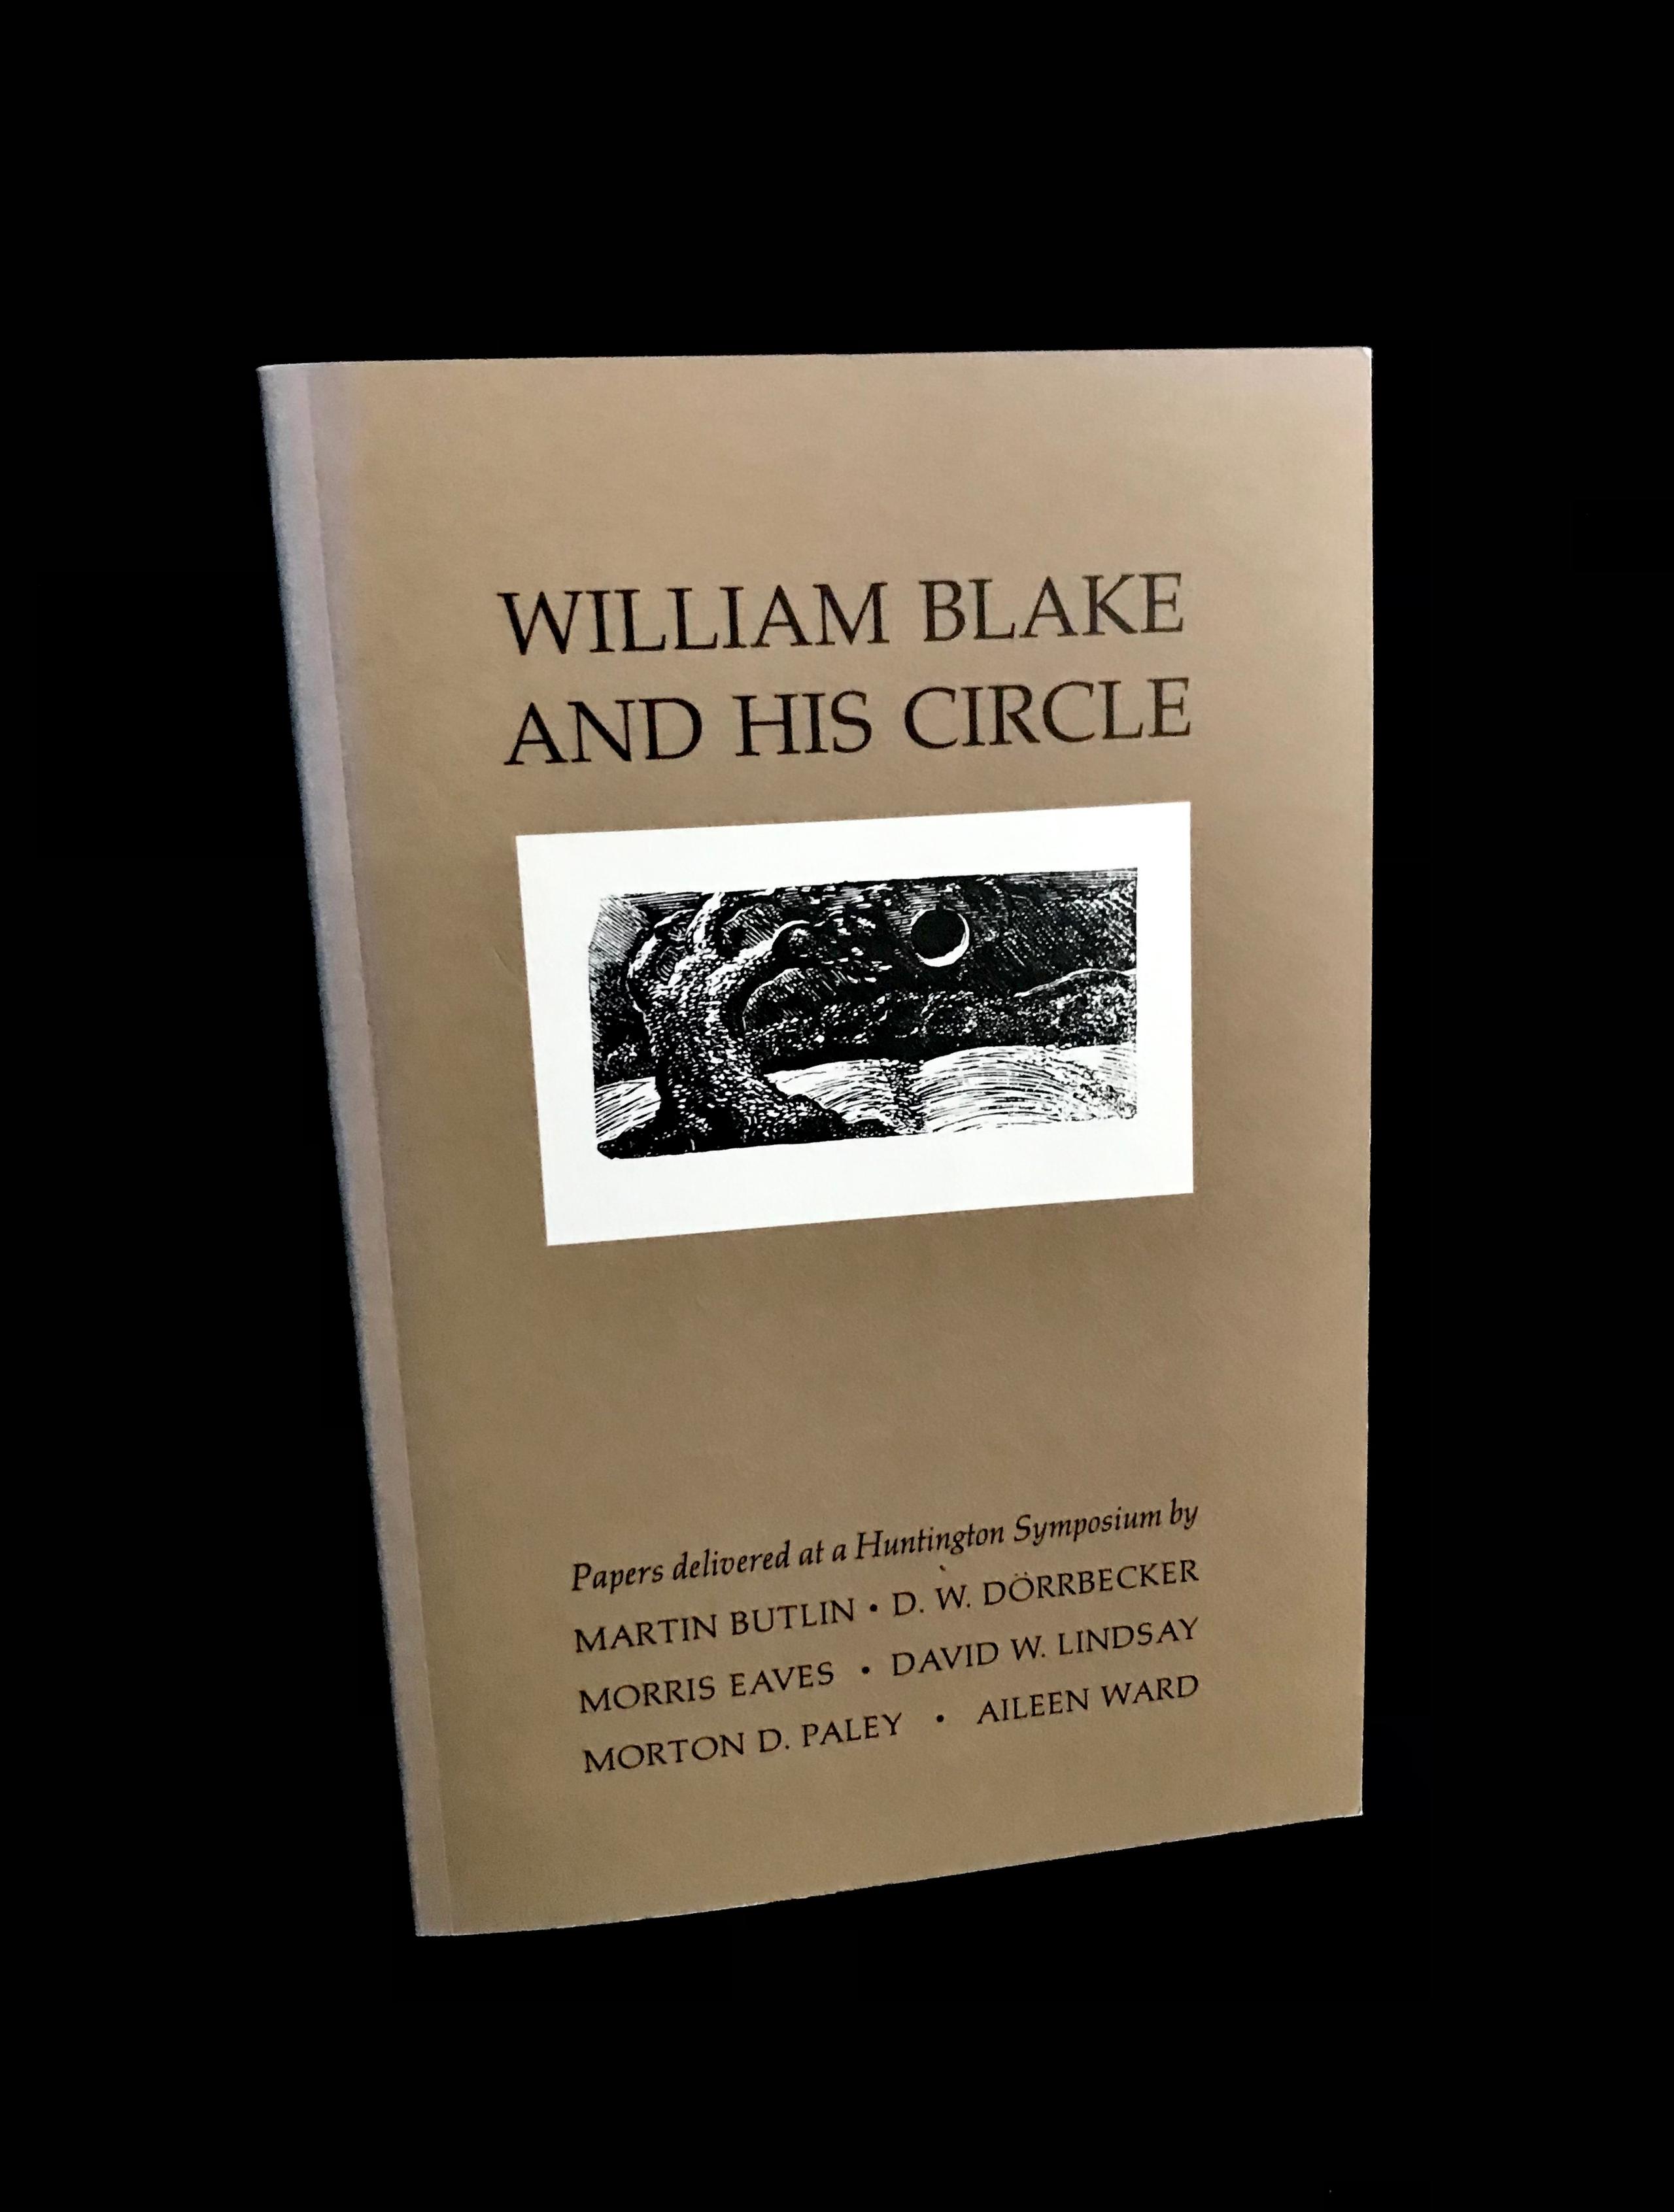 William Blake and his Circle, Papers delivered at a Huntingdon Symposium